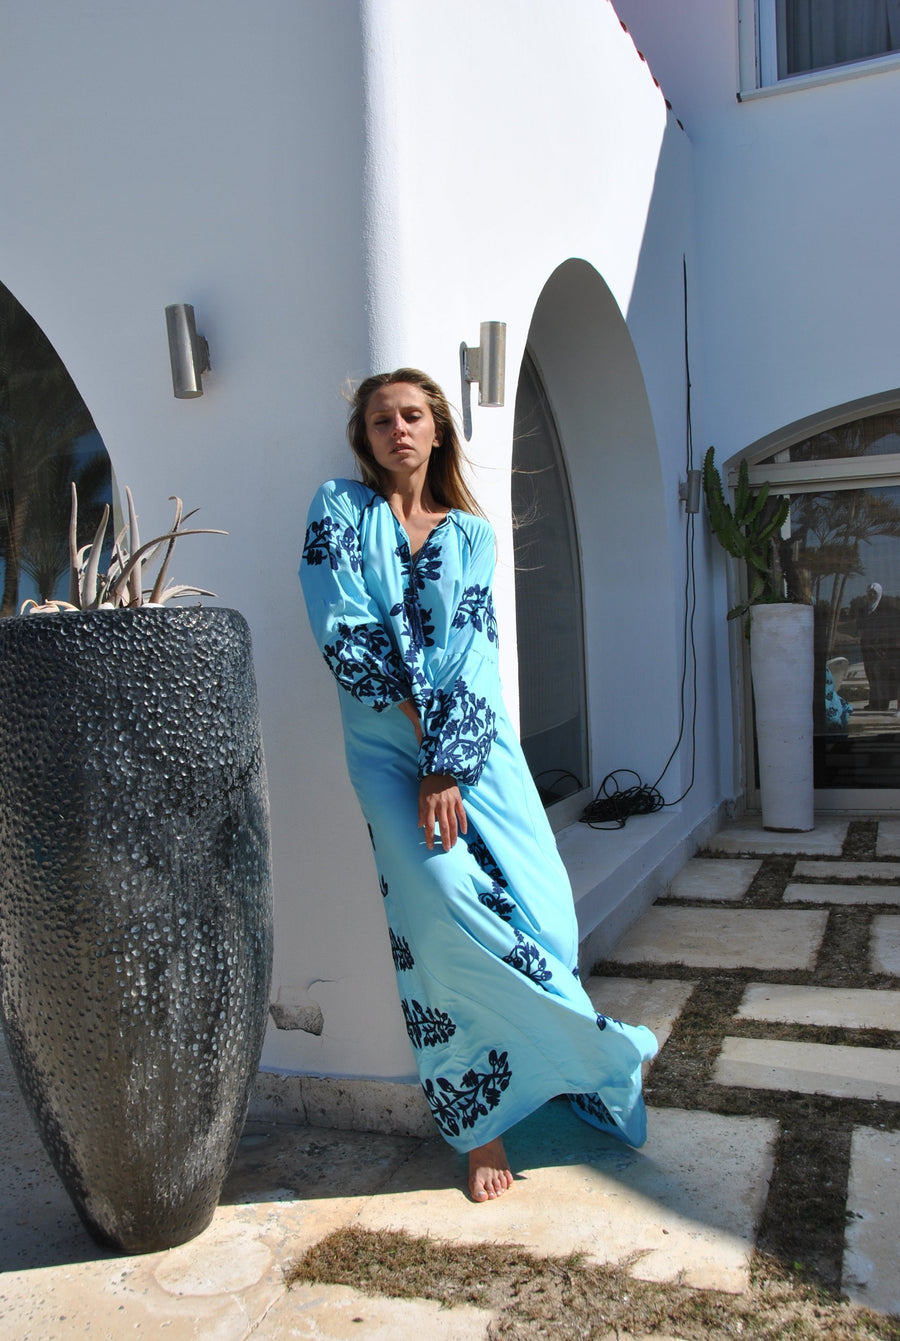 Turquoise embroidered cotton Caftan, caftans for women, Kaftan maxi, embroidered Caftan dress, Caftan maxi dress, Caftans for women, Caftans